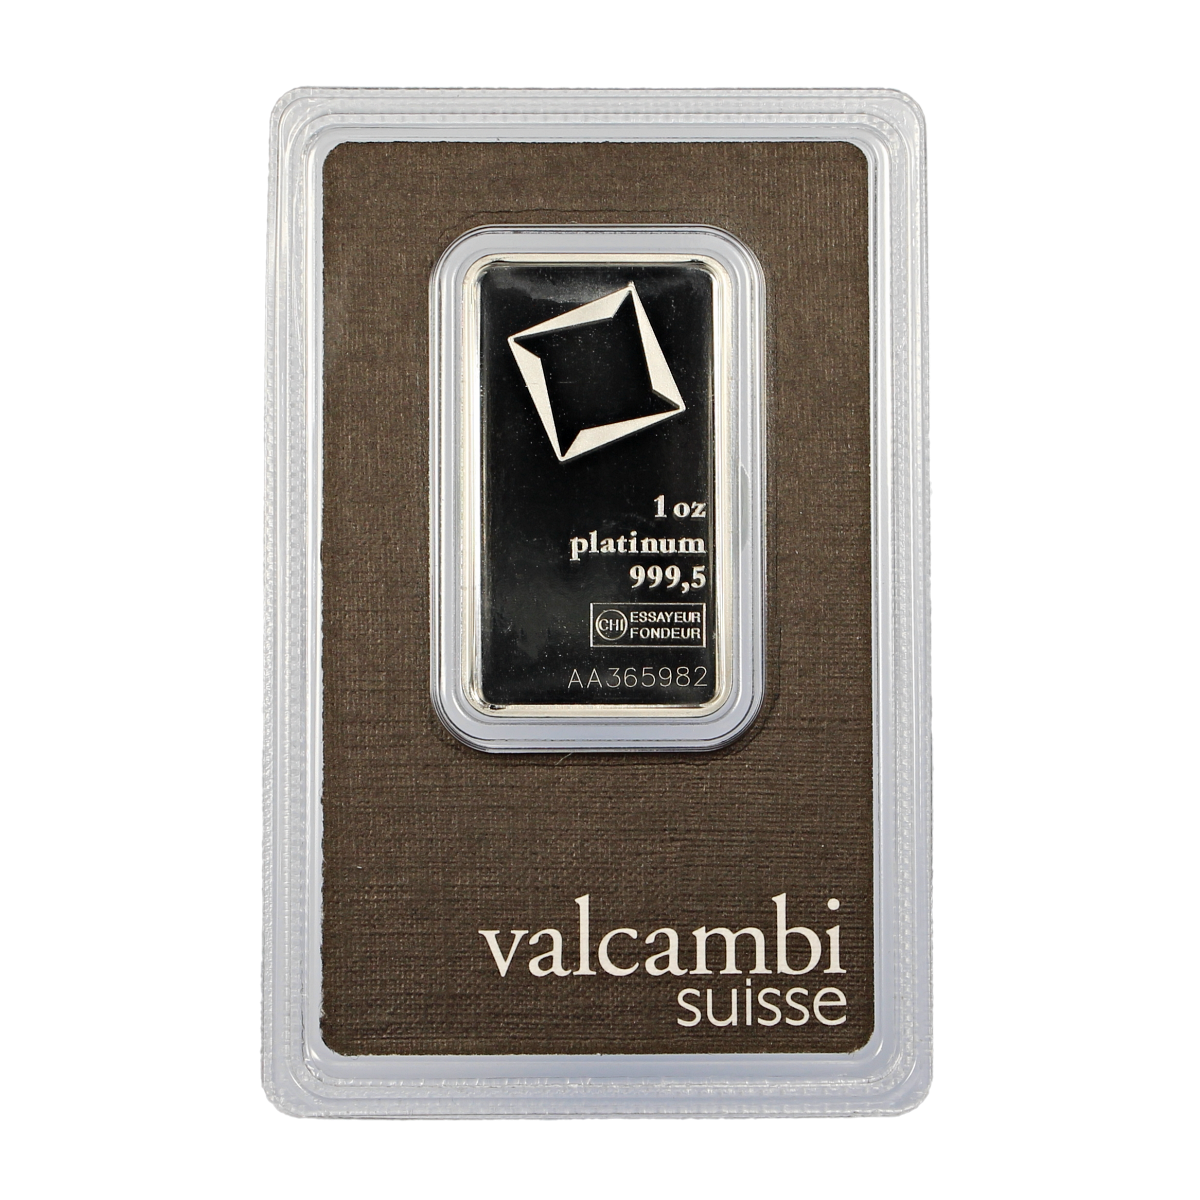 1 Ounce Valcambi Platinum Bar (New with Assay)